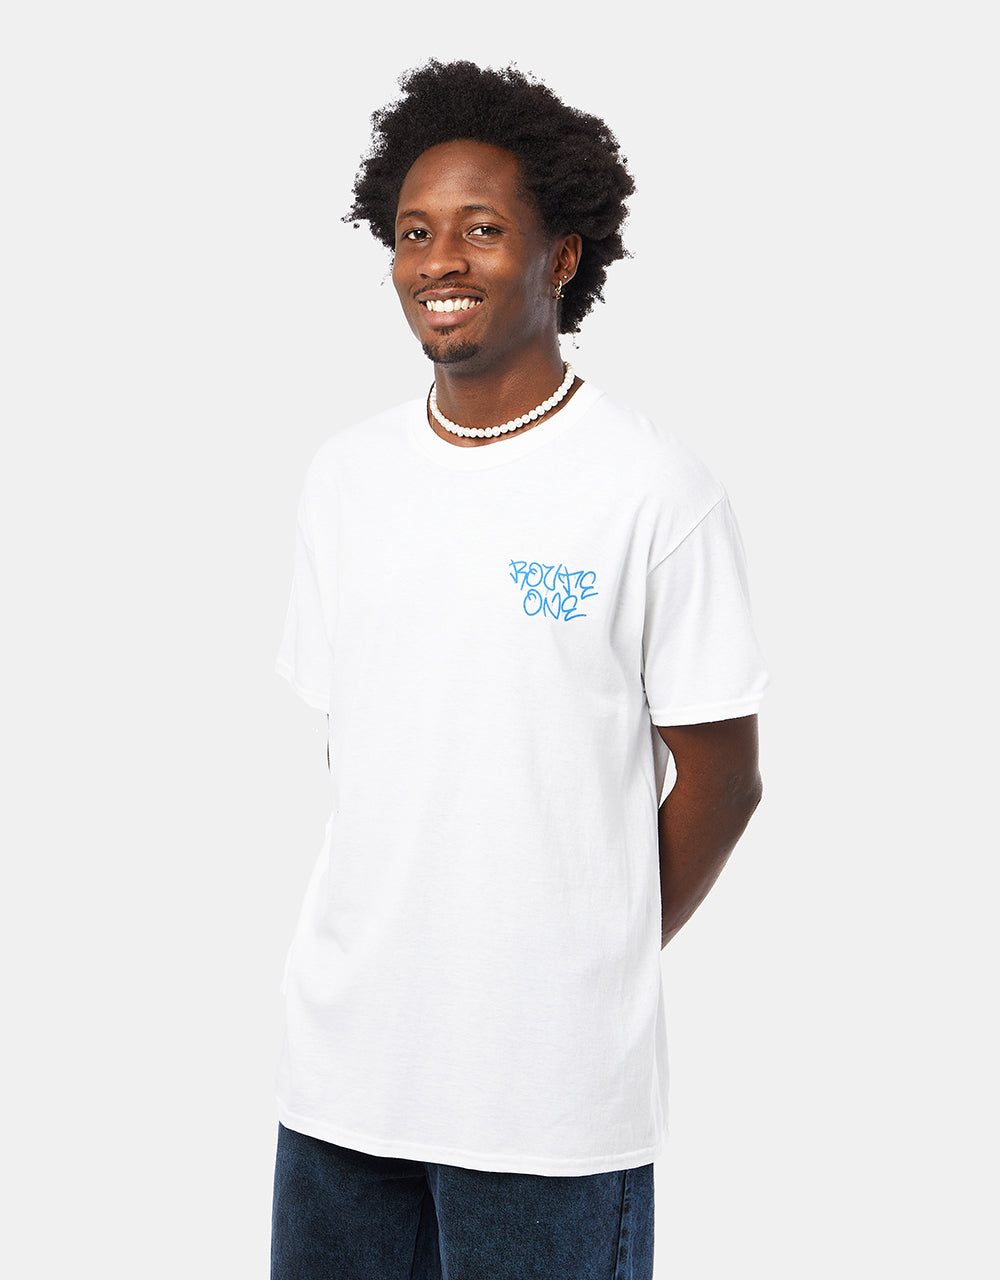 Route One Subway T-Shirt - White